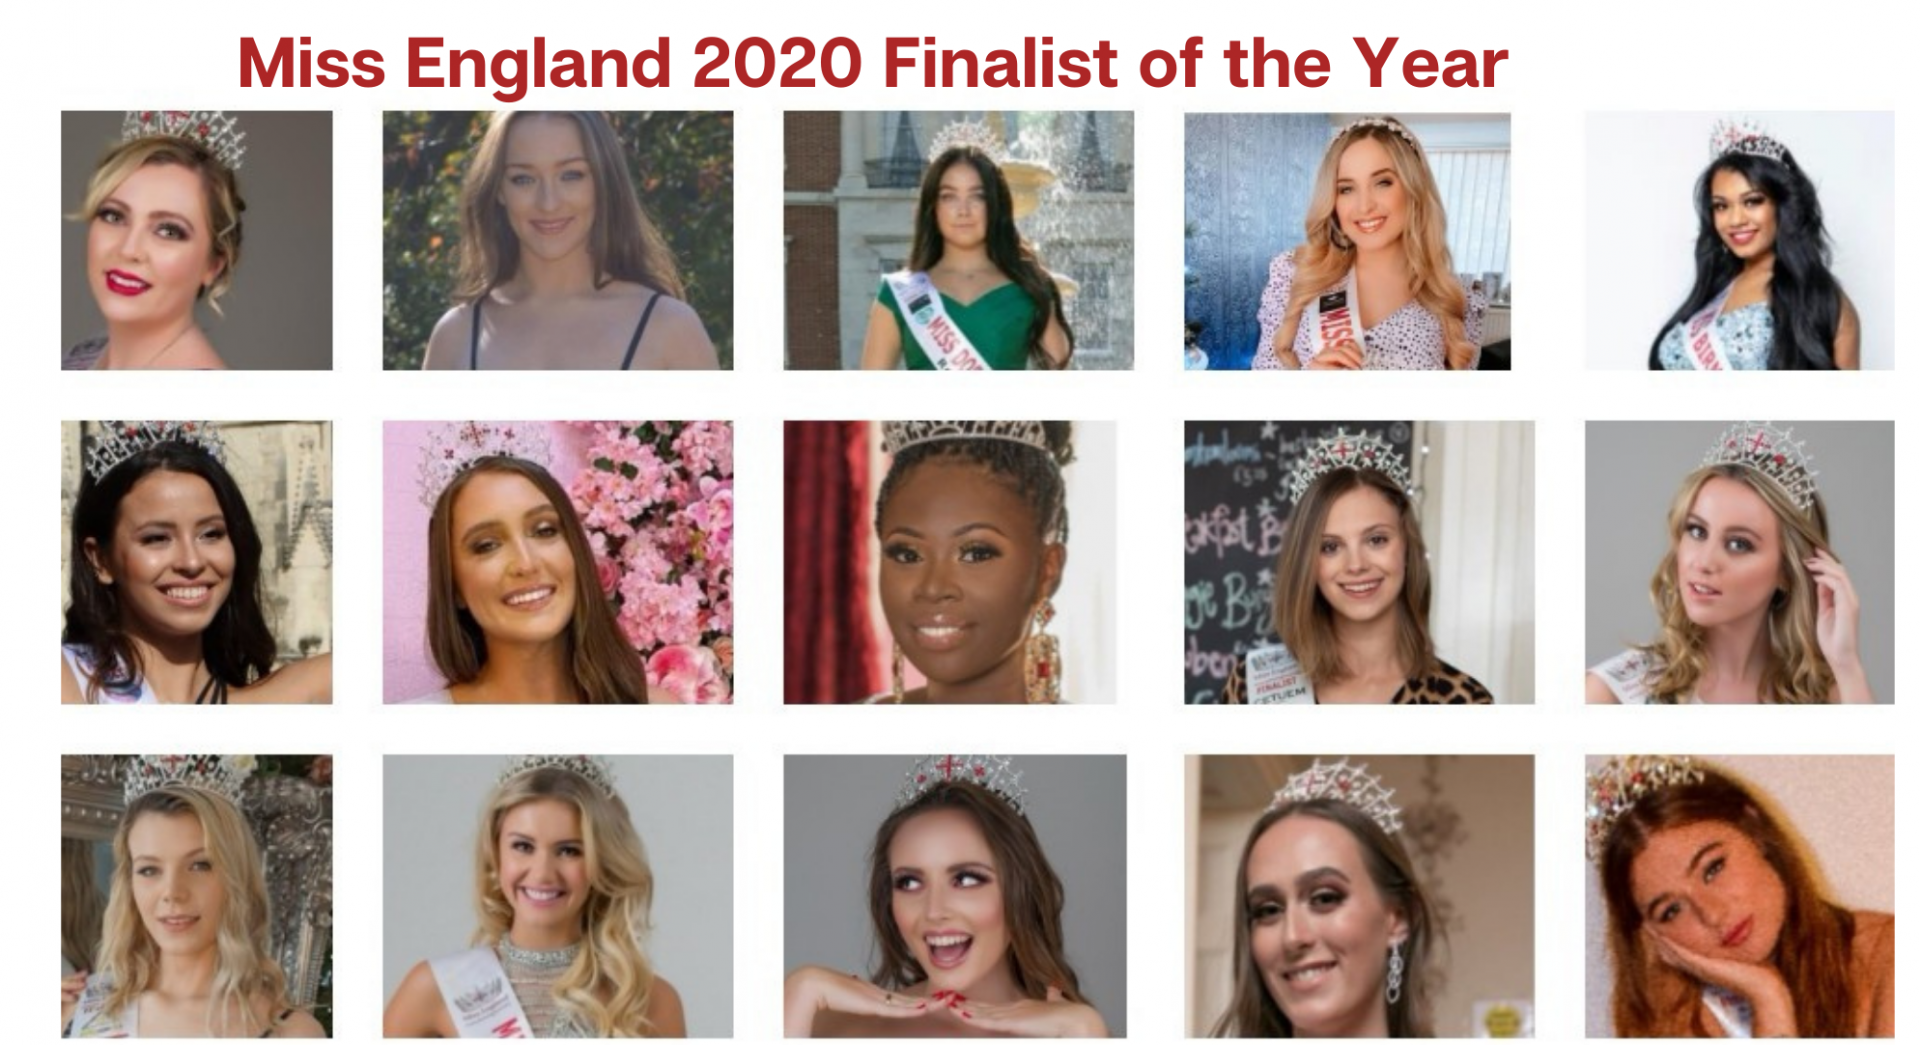 RESULTS – FINALIST OF THE YEAR